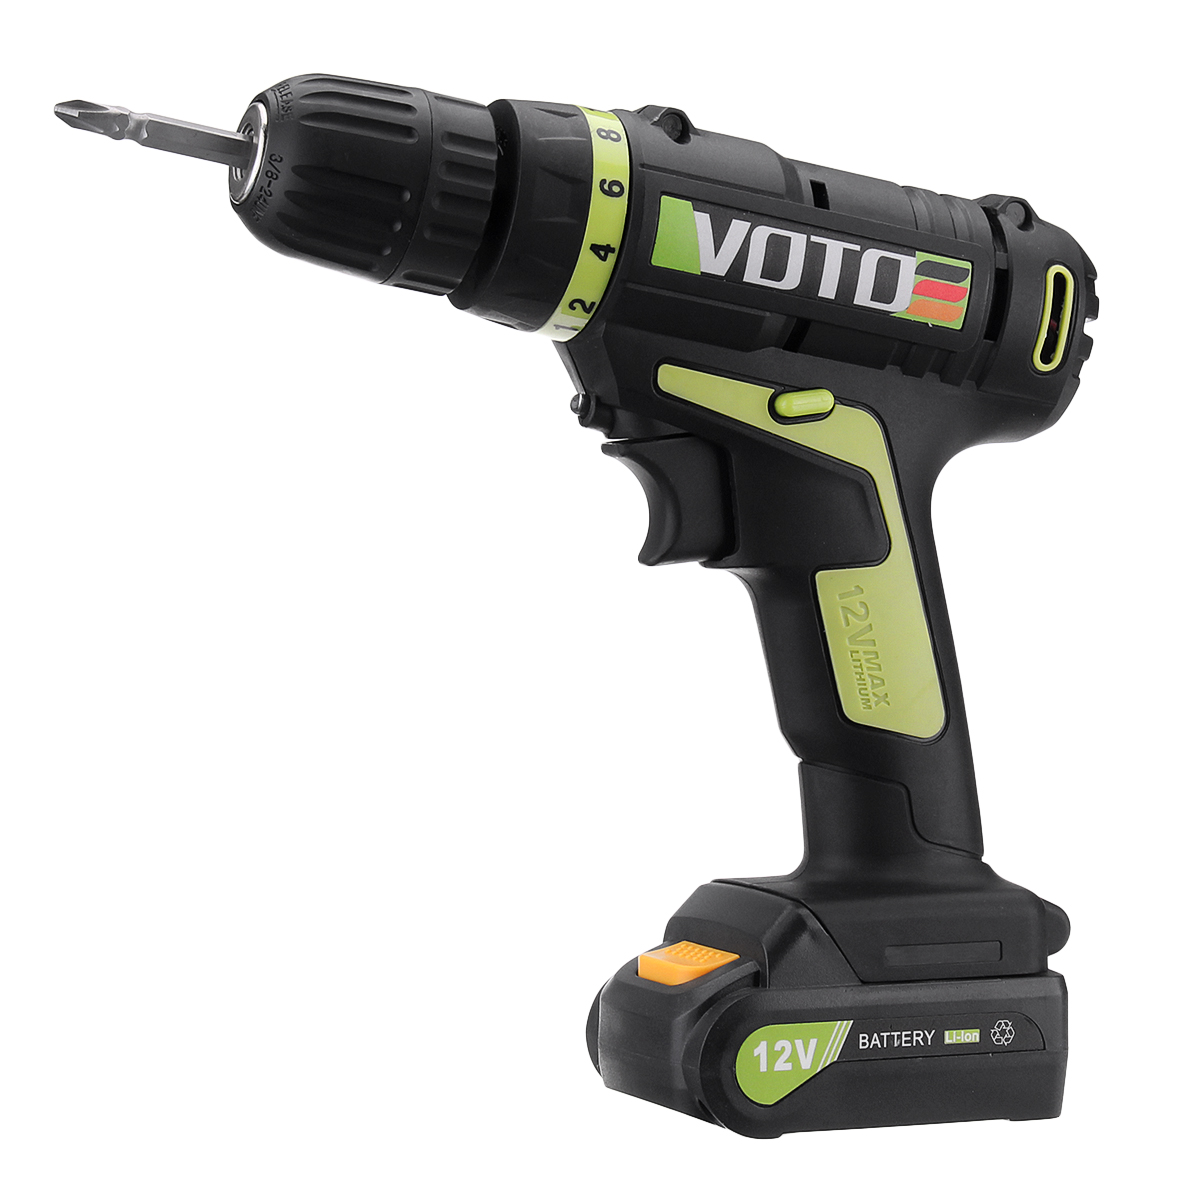 VOTO-AC100-240V-DC12V-Cordless-Rechargeable--Electric-Screwdriver-Li-ion-Battery-Power-Scew-Driver-1305287-4